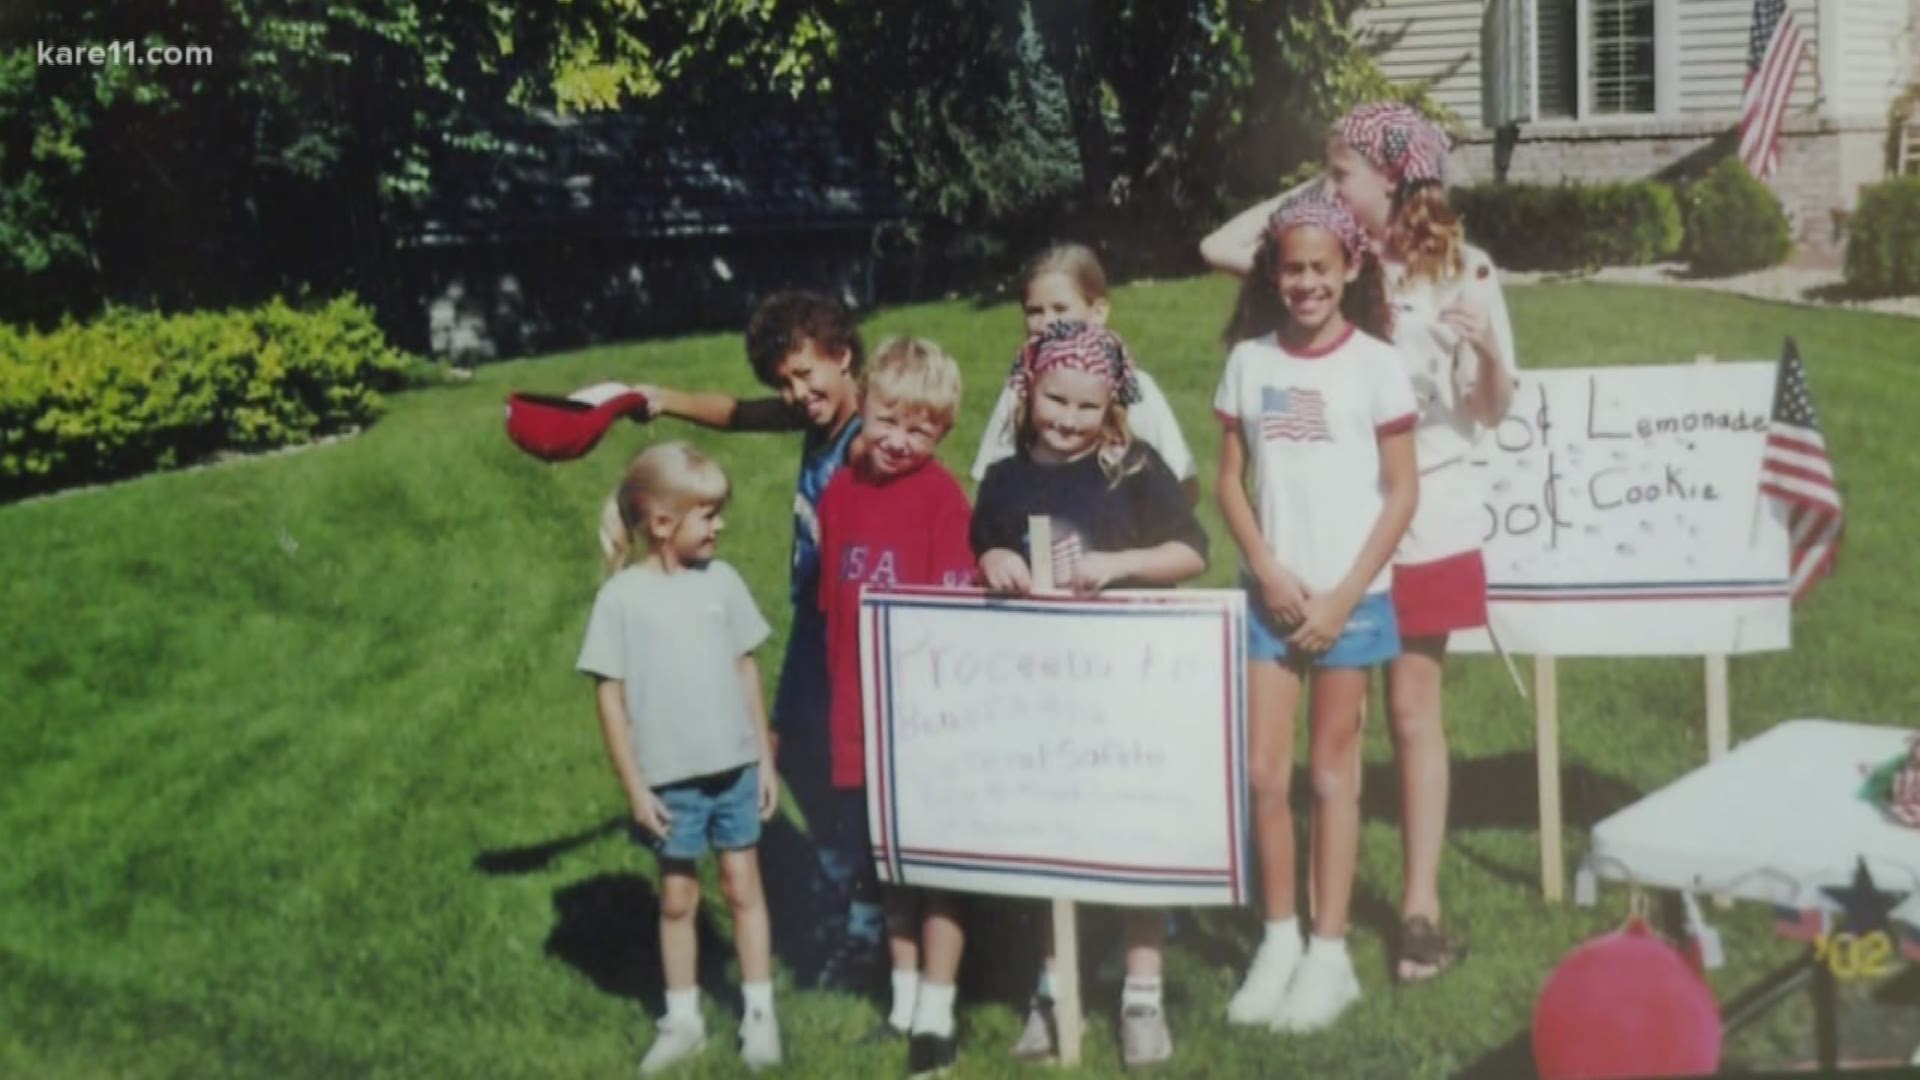 In an Eden Prairie neighborhood, a group of kids wanted to do their part to remember Sept. 11. Now 18 years later, they've kept their promise to not forget. https://kare11.tv/2x7cTPp